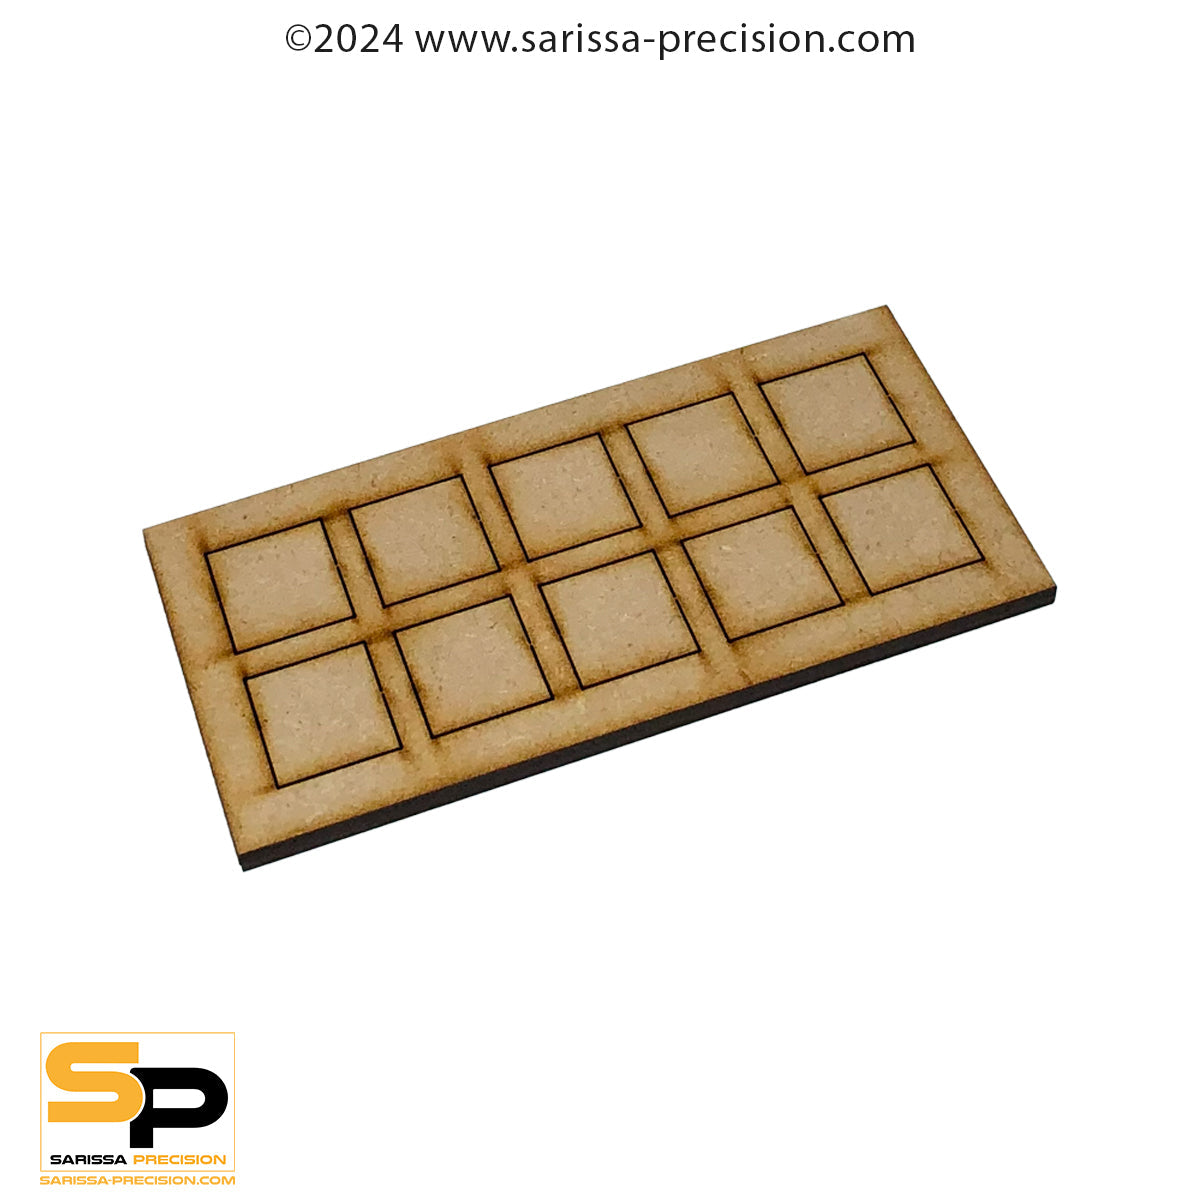 10 x 7 25x25mm Conversion Tray for 20x20mm bases